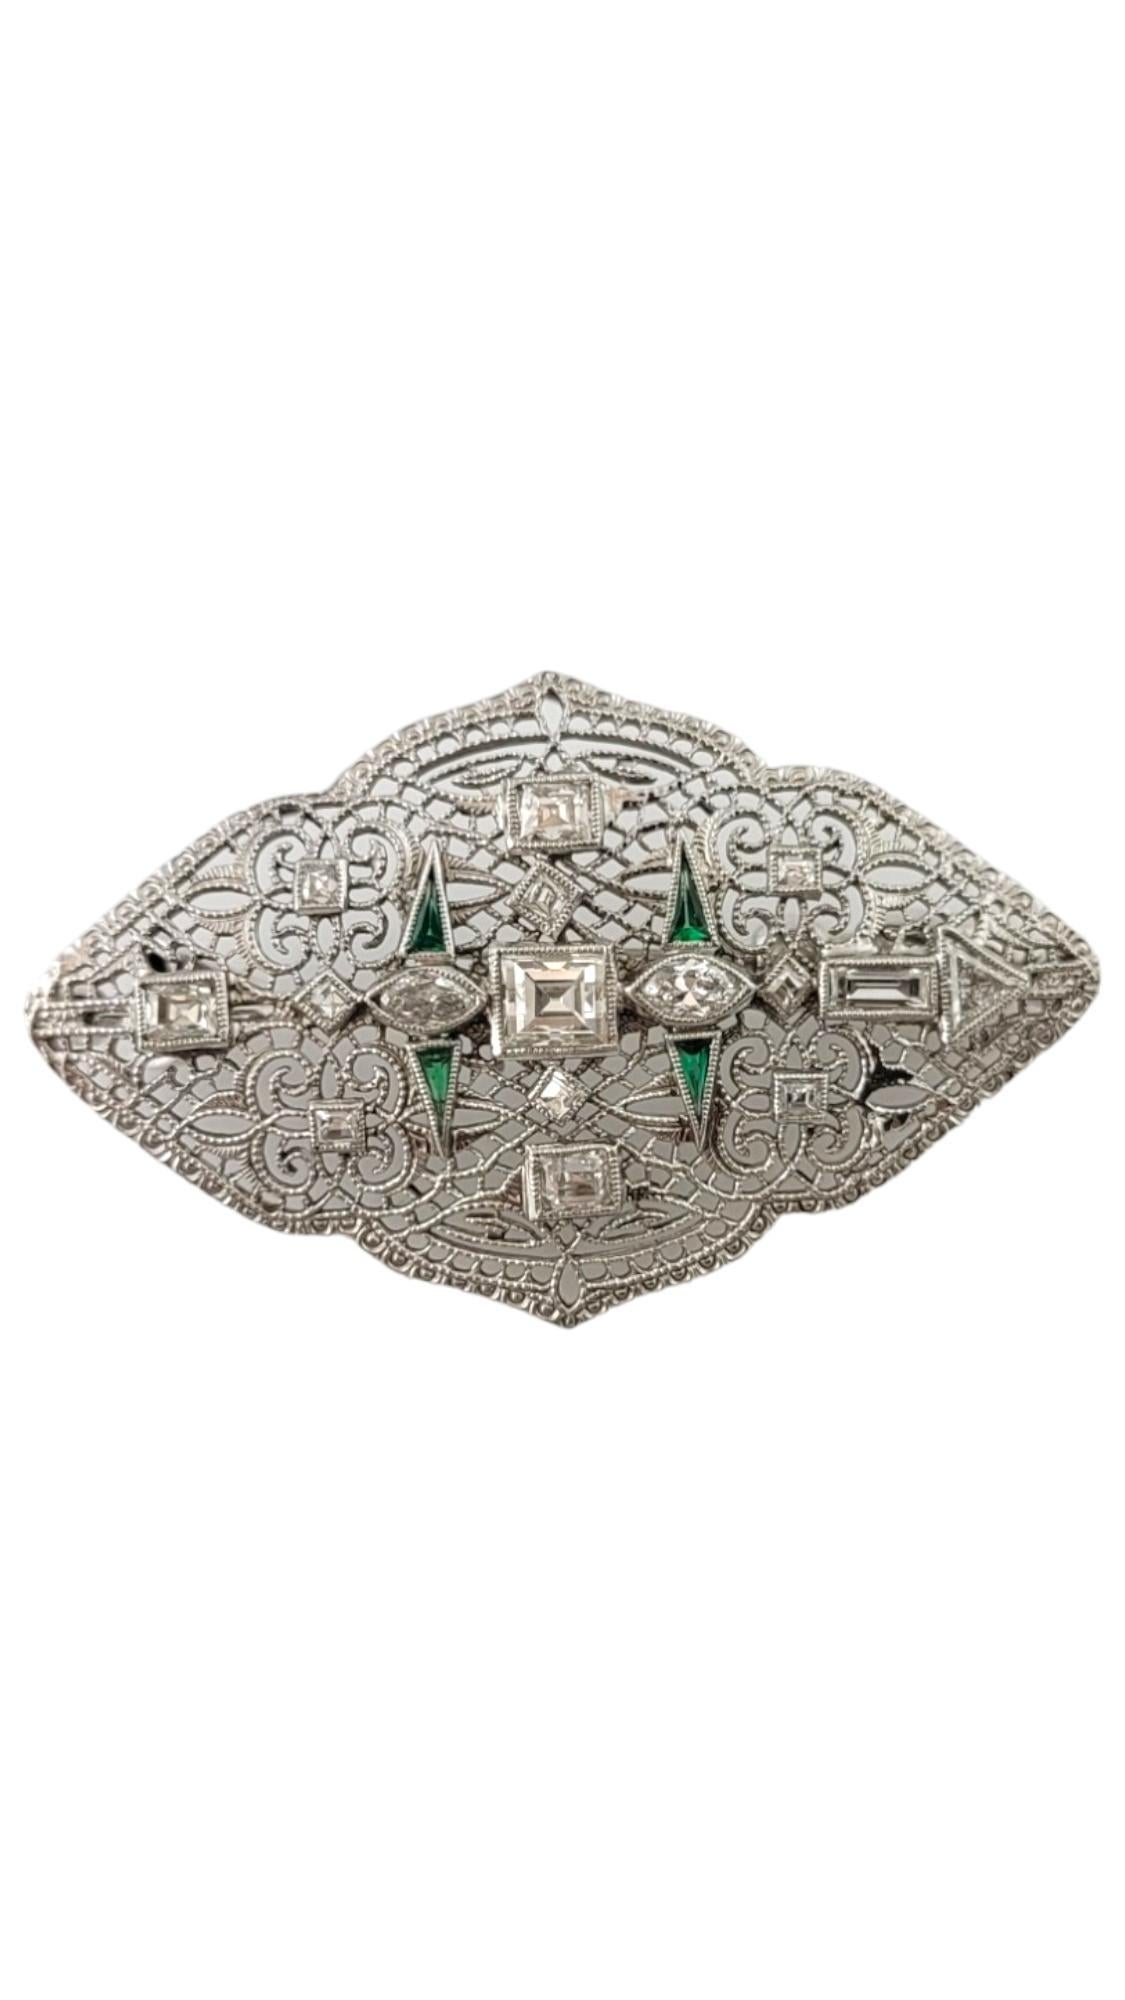 Vintage 14 Karat White Gold Diamond and Emerald Pendant/Brooch-

This exquisite piece features 16 diamonds: 12 square cut, 1 baguette, 2 marquis, and 1 trillion. Accented with four triangular genuine emeralds. Beautifully set in delicate 14K white